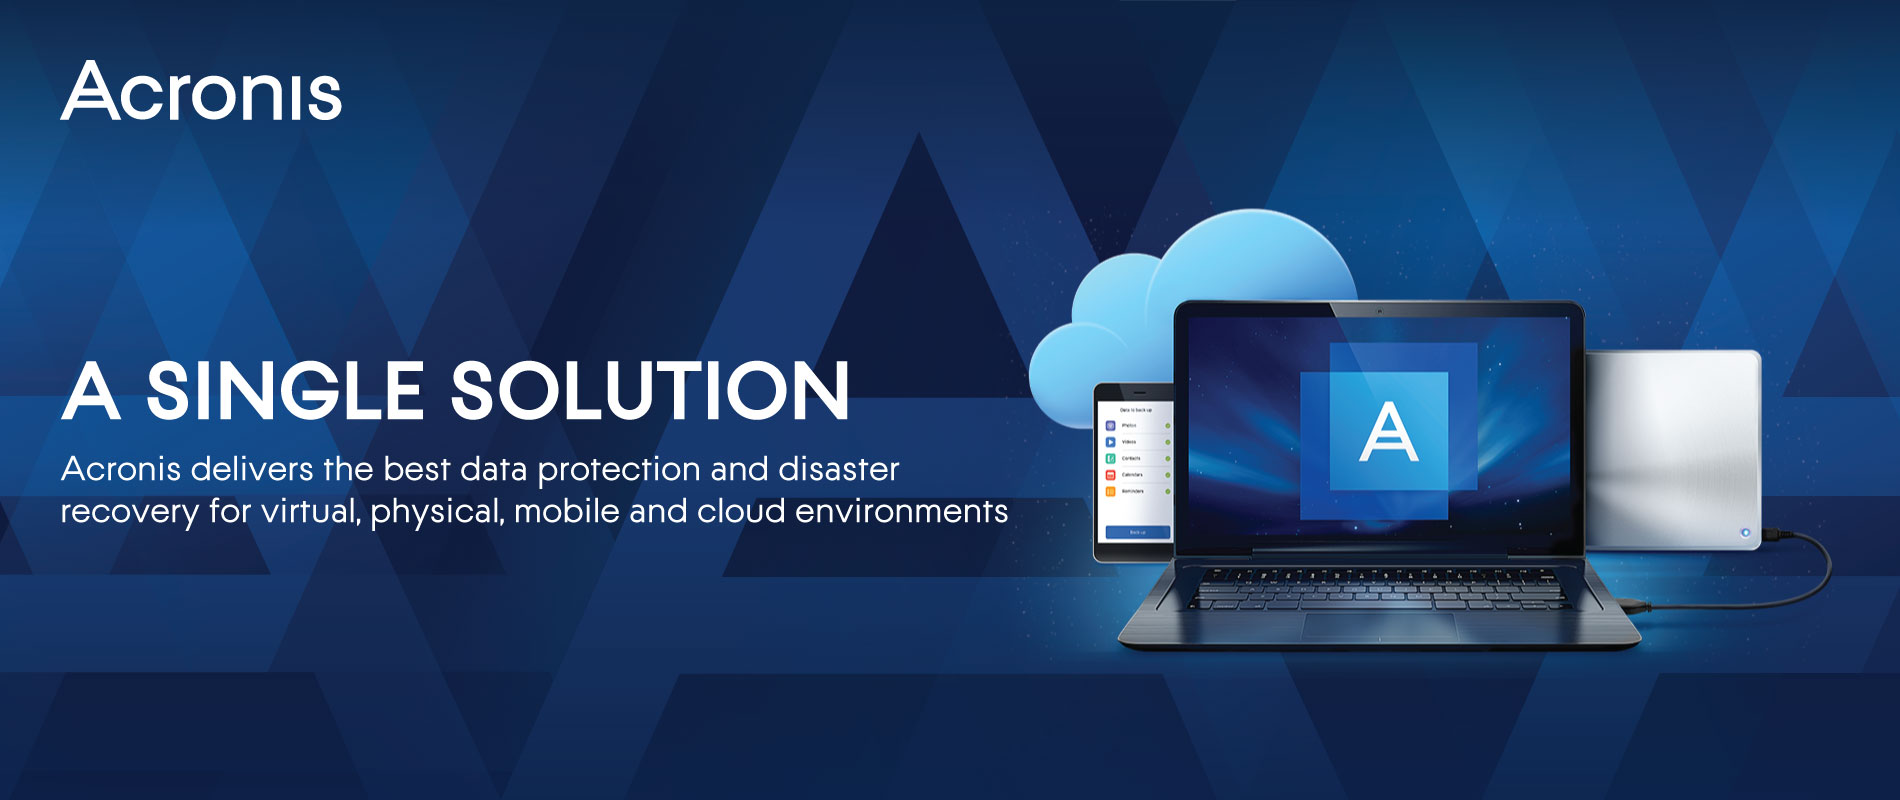 acronis banner